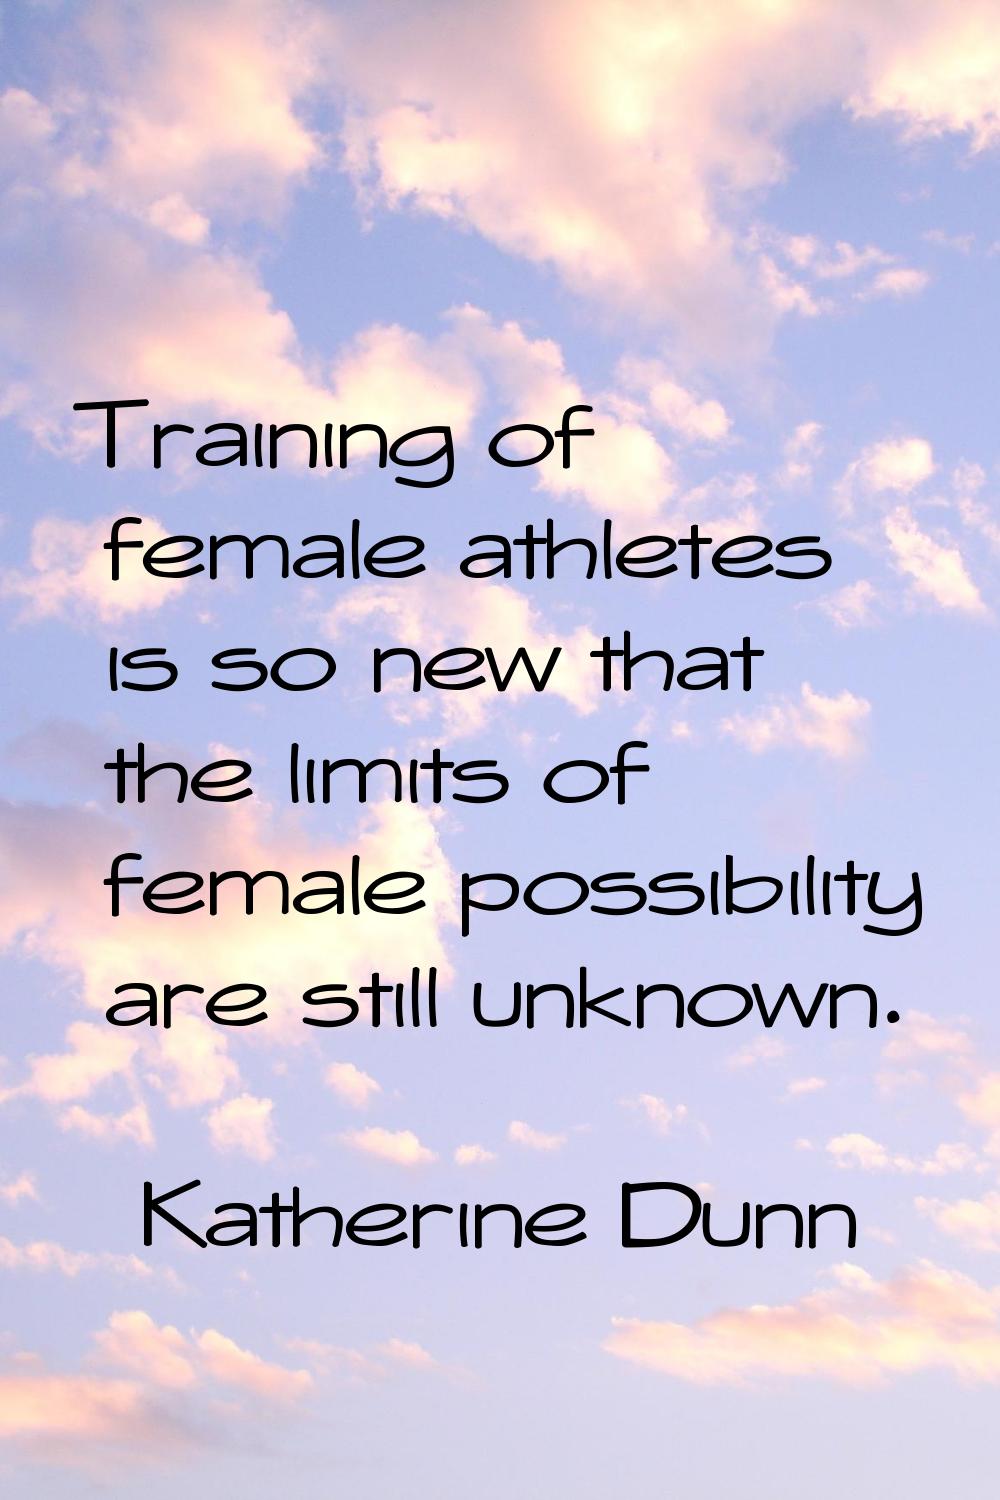 Training of female athletes is so new that the limits of female possibility are still unknown.